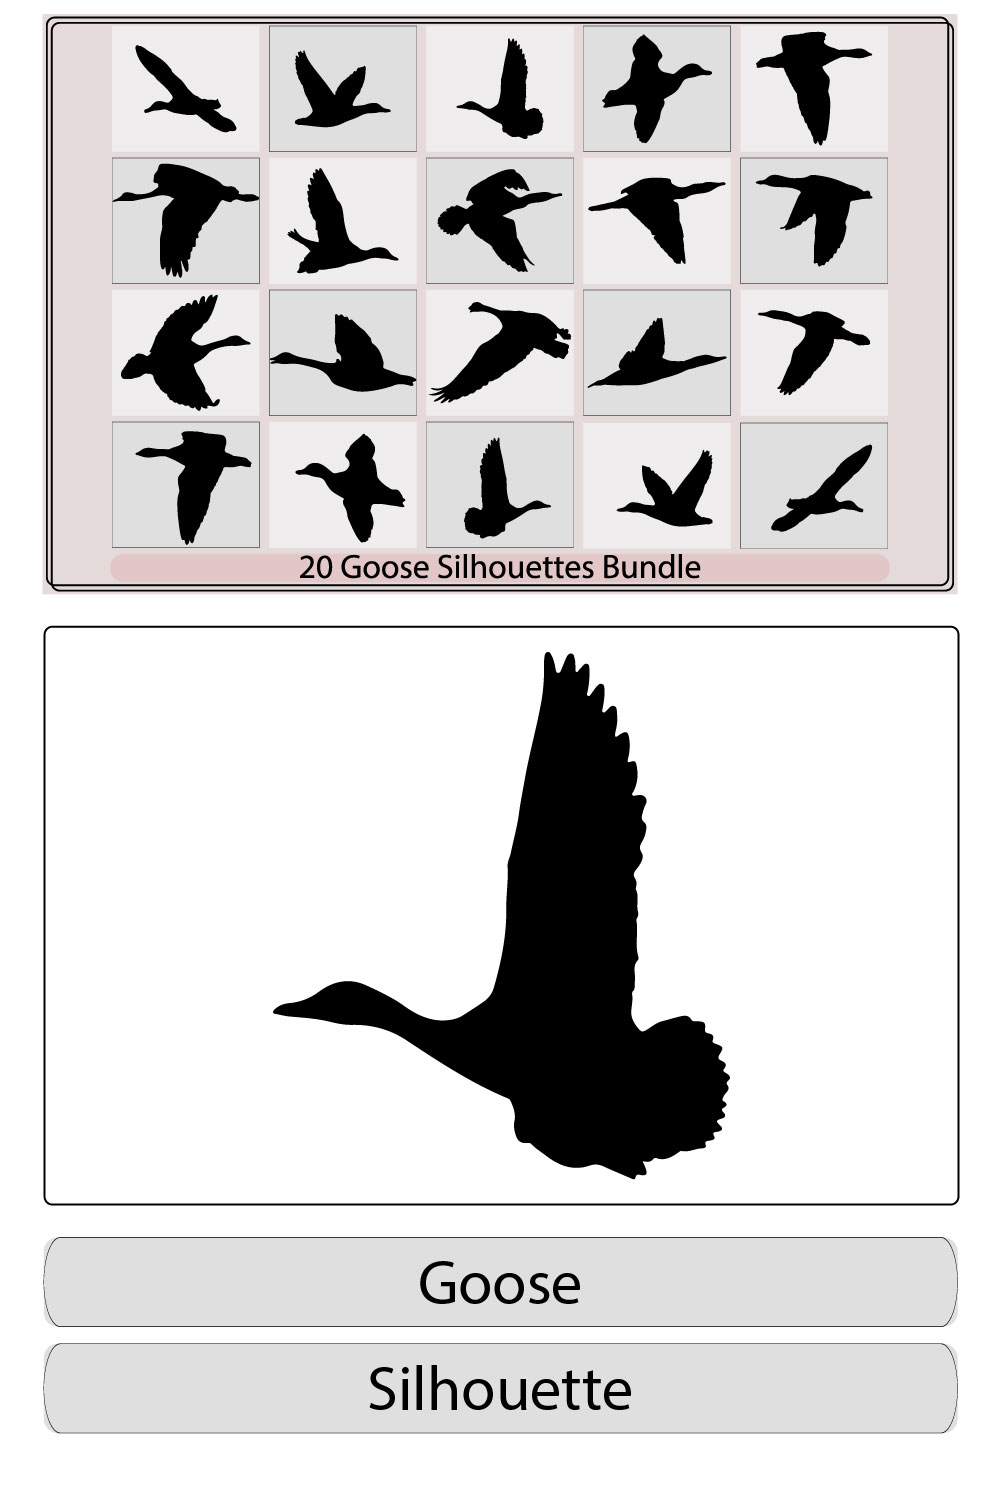 Goose silhouette iconssilhouette goose on white background,goose vector silhouette,flying goose silhouette vector logo pinterest preview image.